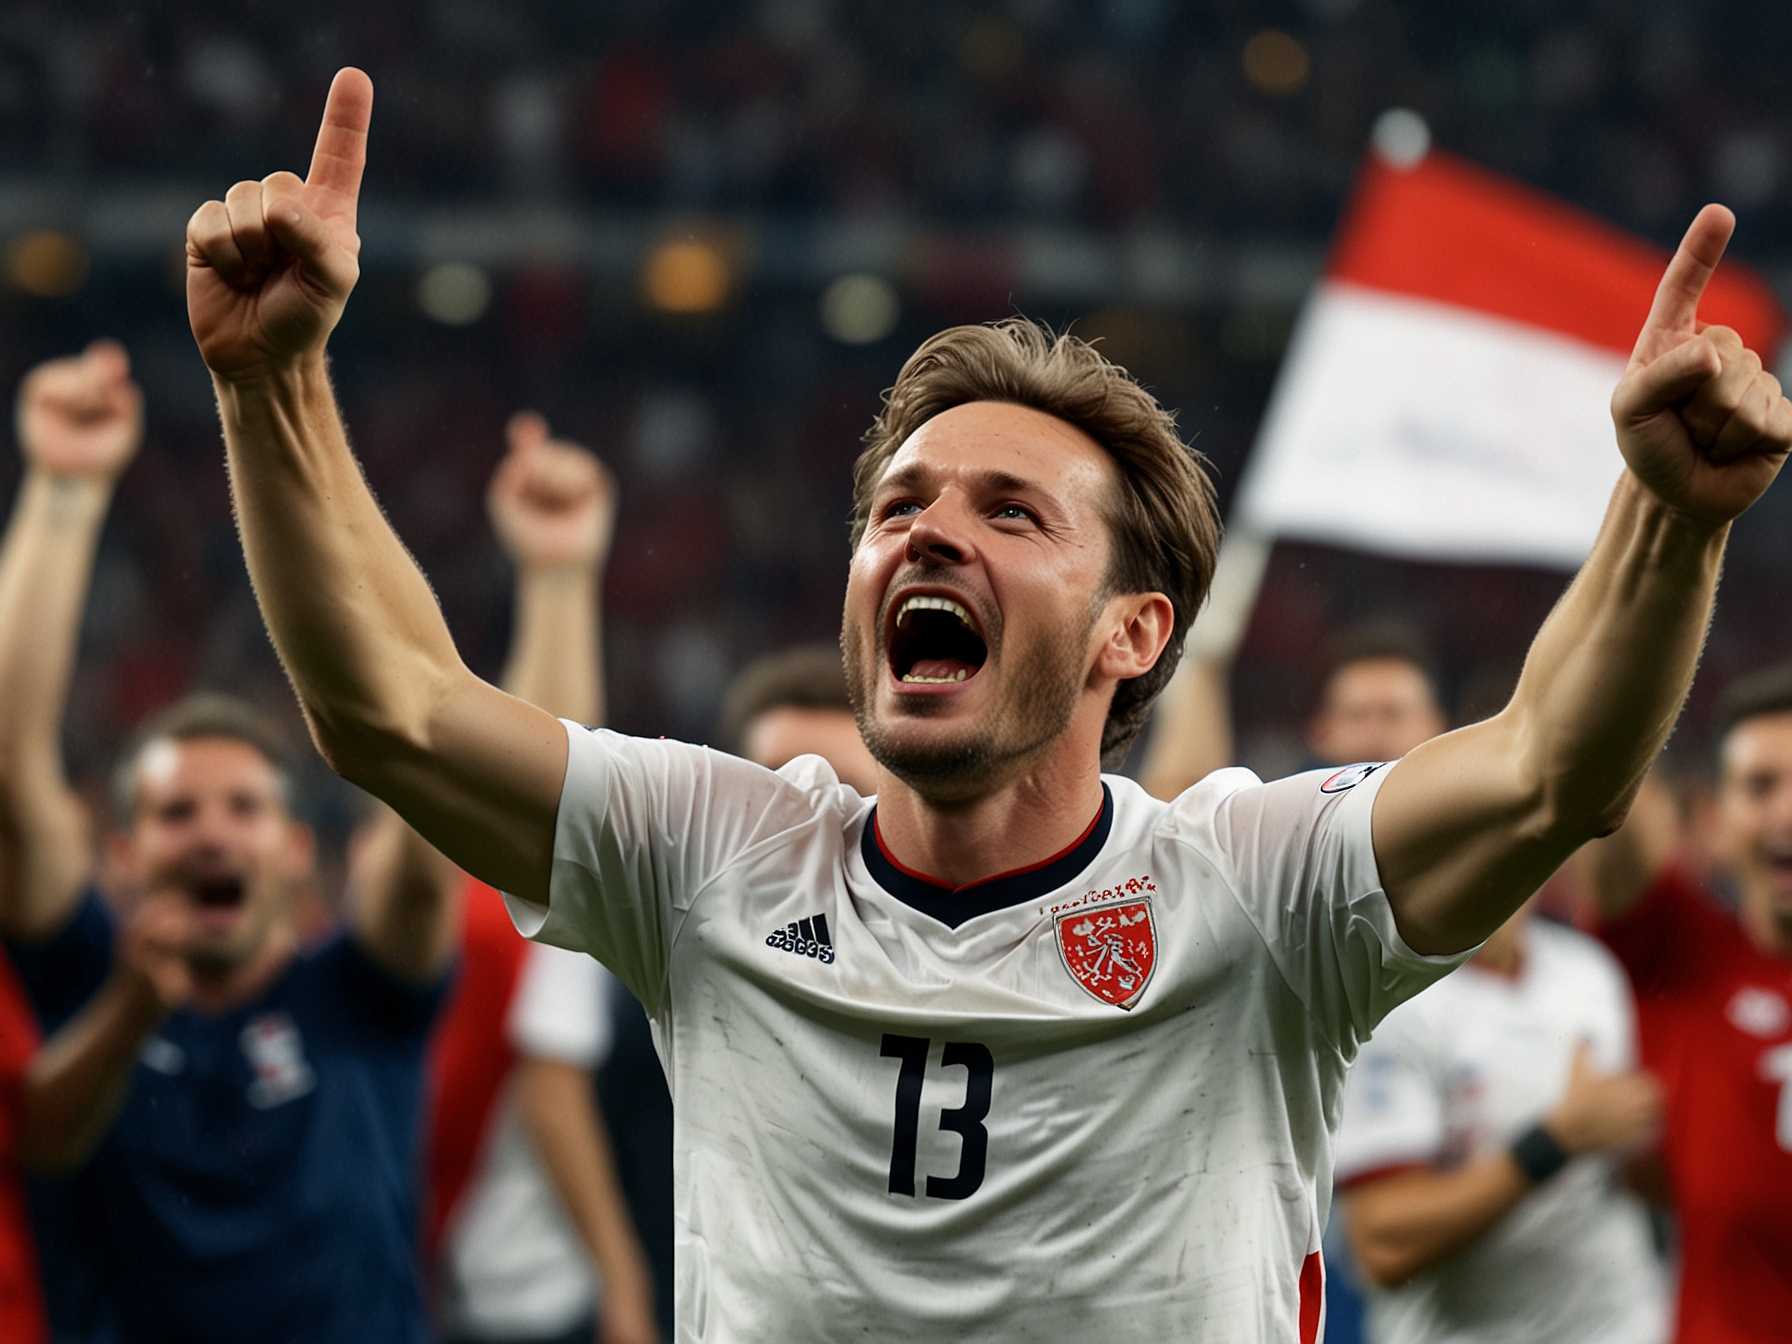 Gernot Trauner, amidst an ecstatic celebration, is seen just after scoring the decisive goal, highlighting Austria’s strategic prowess and the turning point of the match.